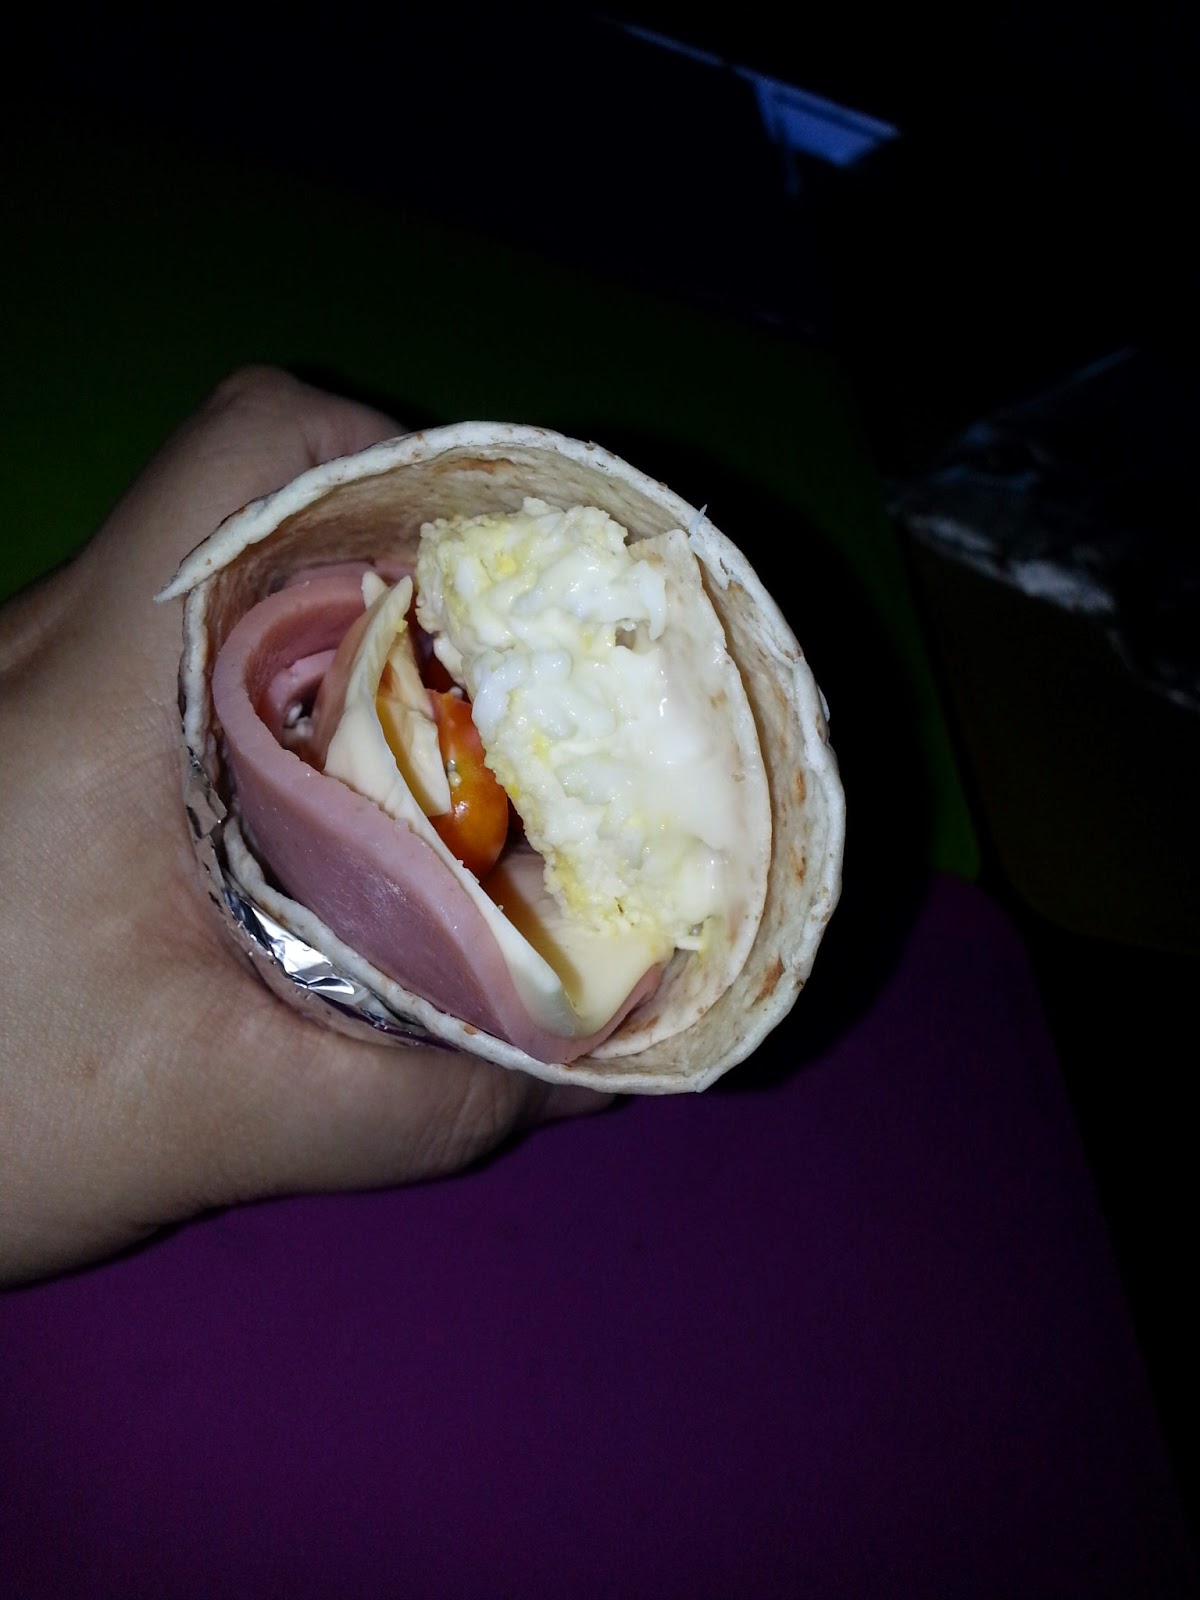 Home Cooked Dishes: Wholemeal Wrap with Egg, Ham & Cheese